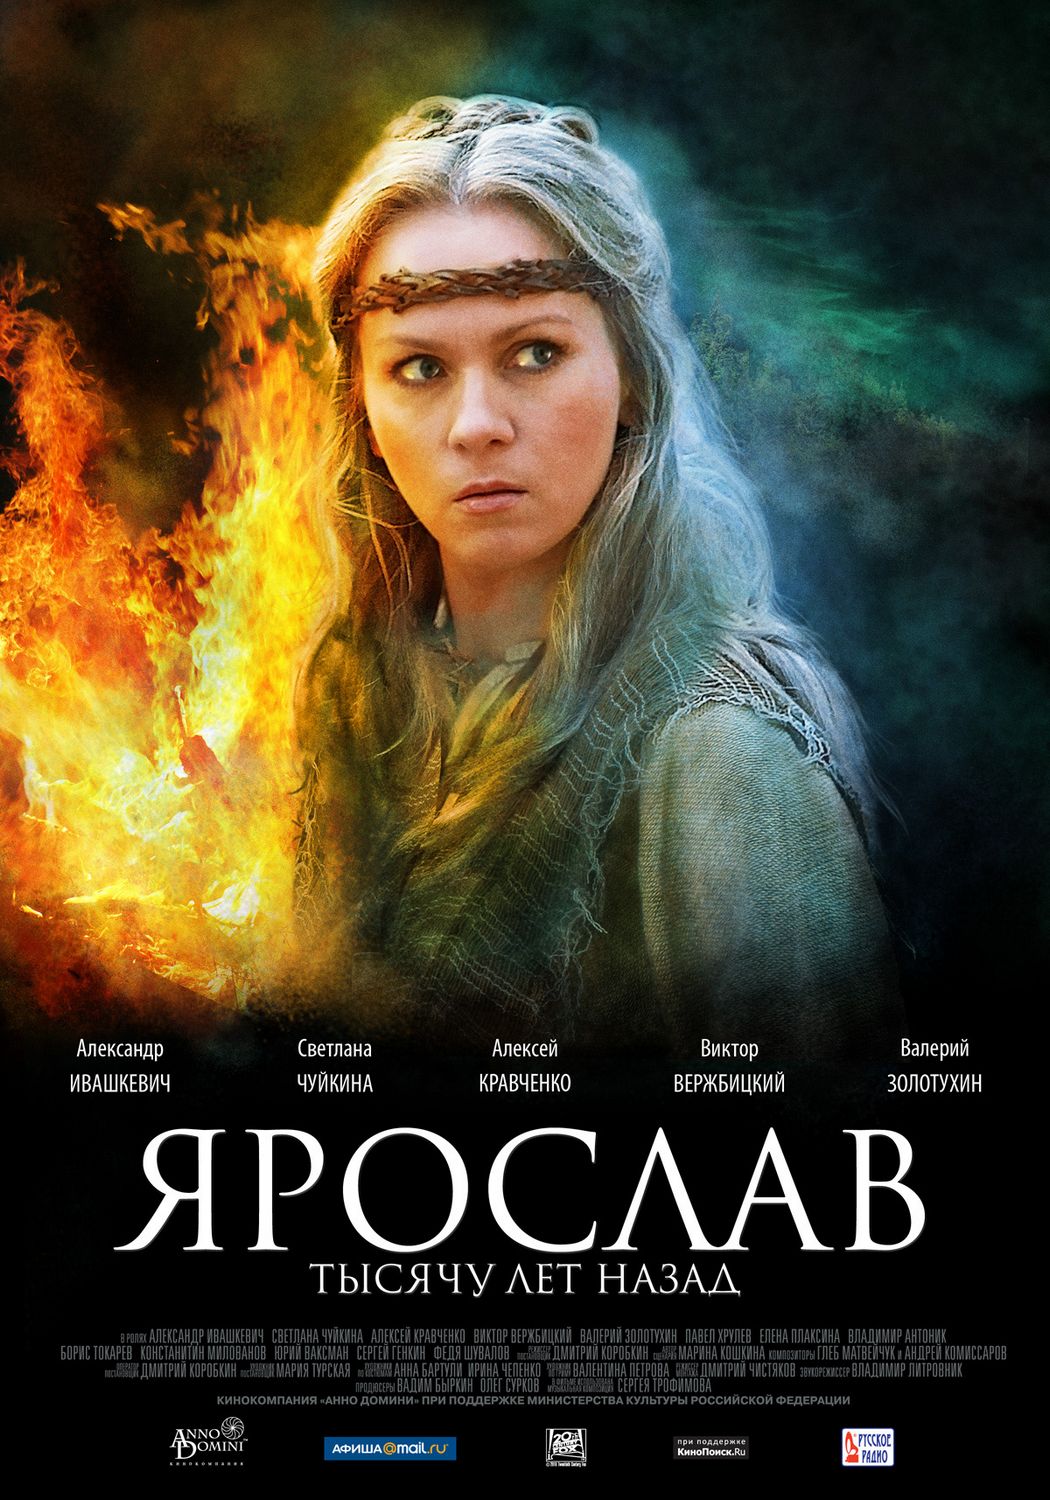 Extra Large Movie Poster Image for Yaroslav (#3 of 5)